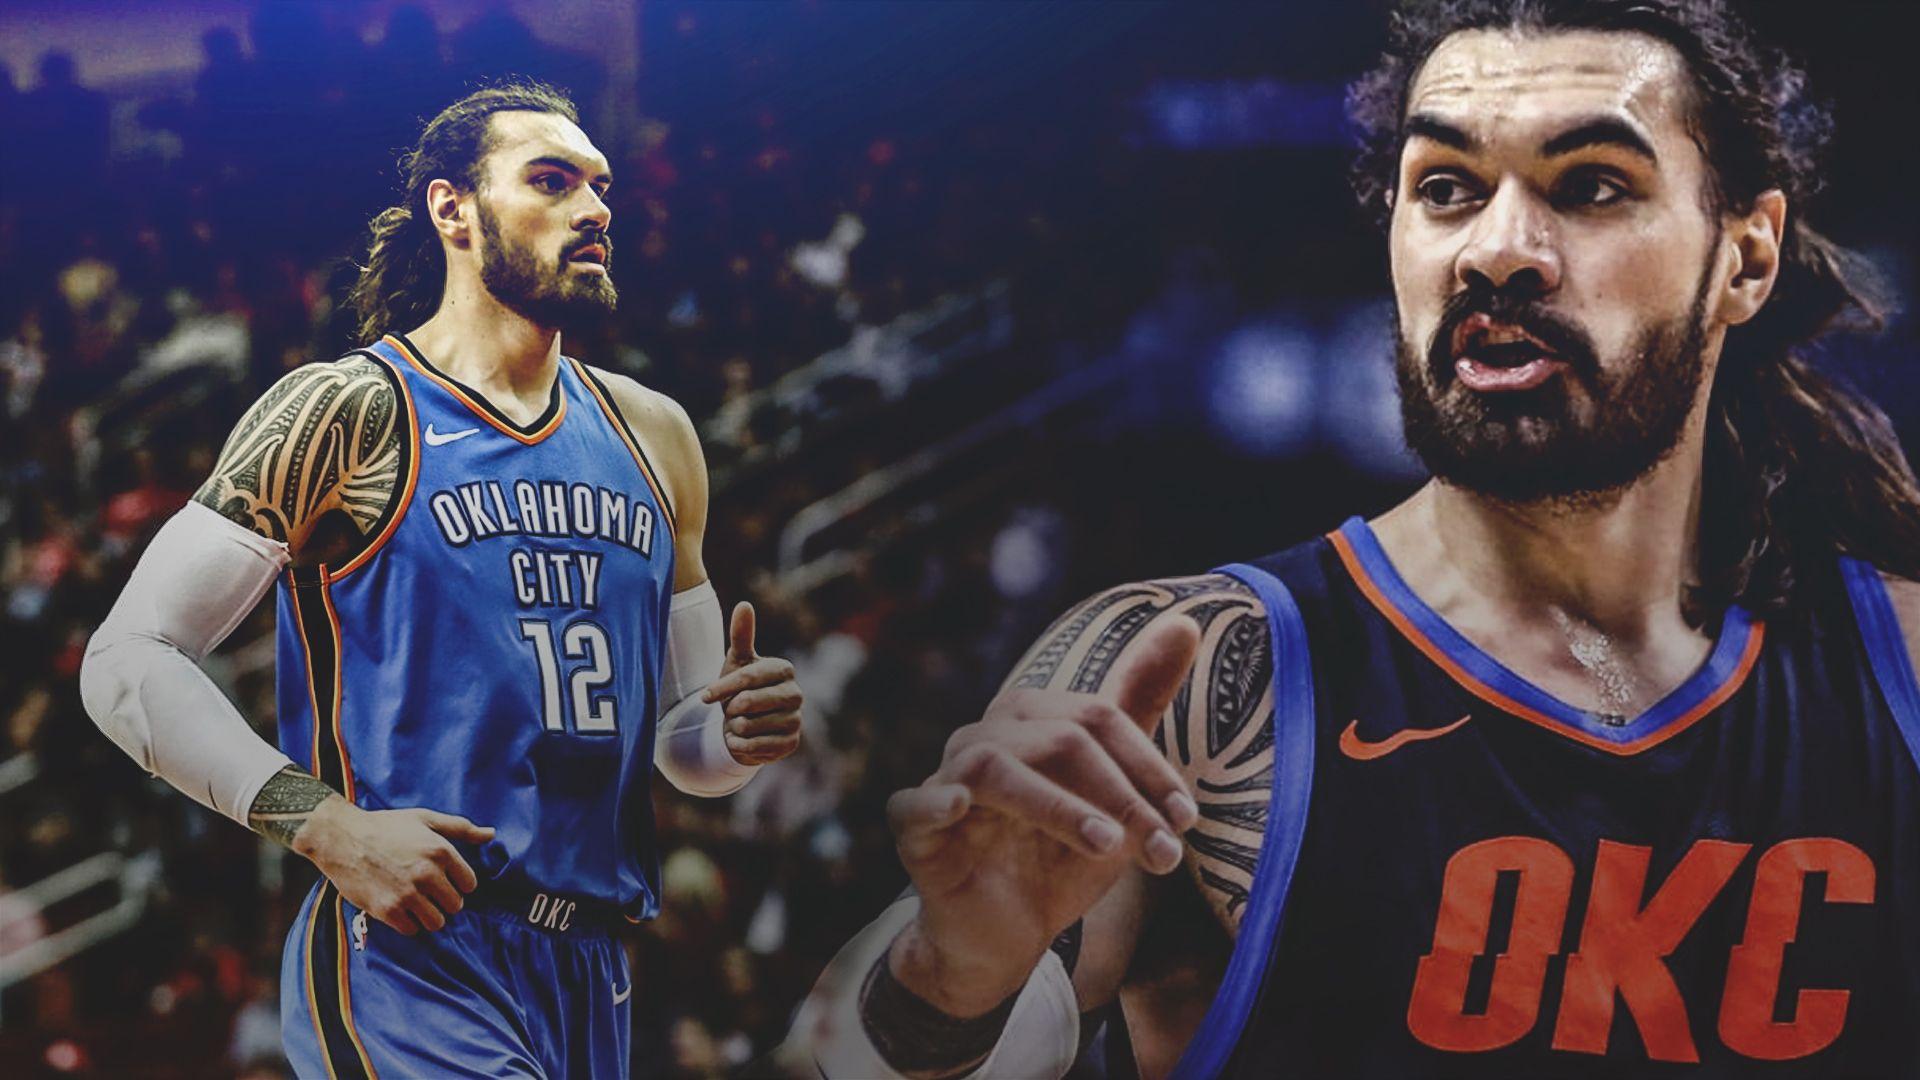 Thunder news: Steven Adams details his first time embracing Spurs